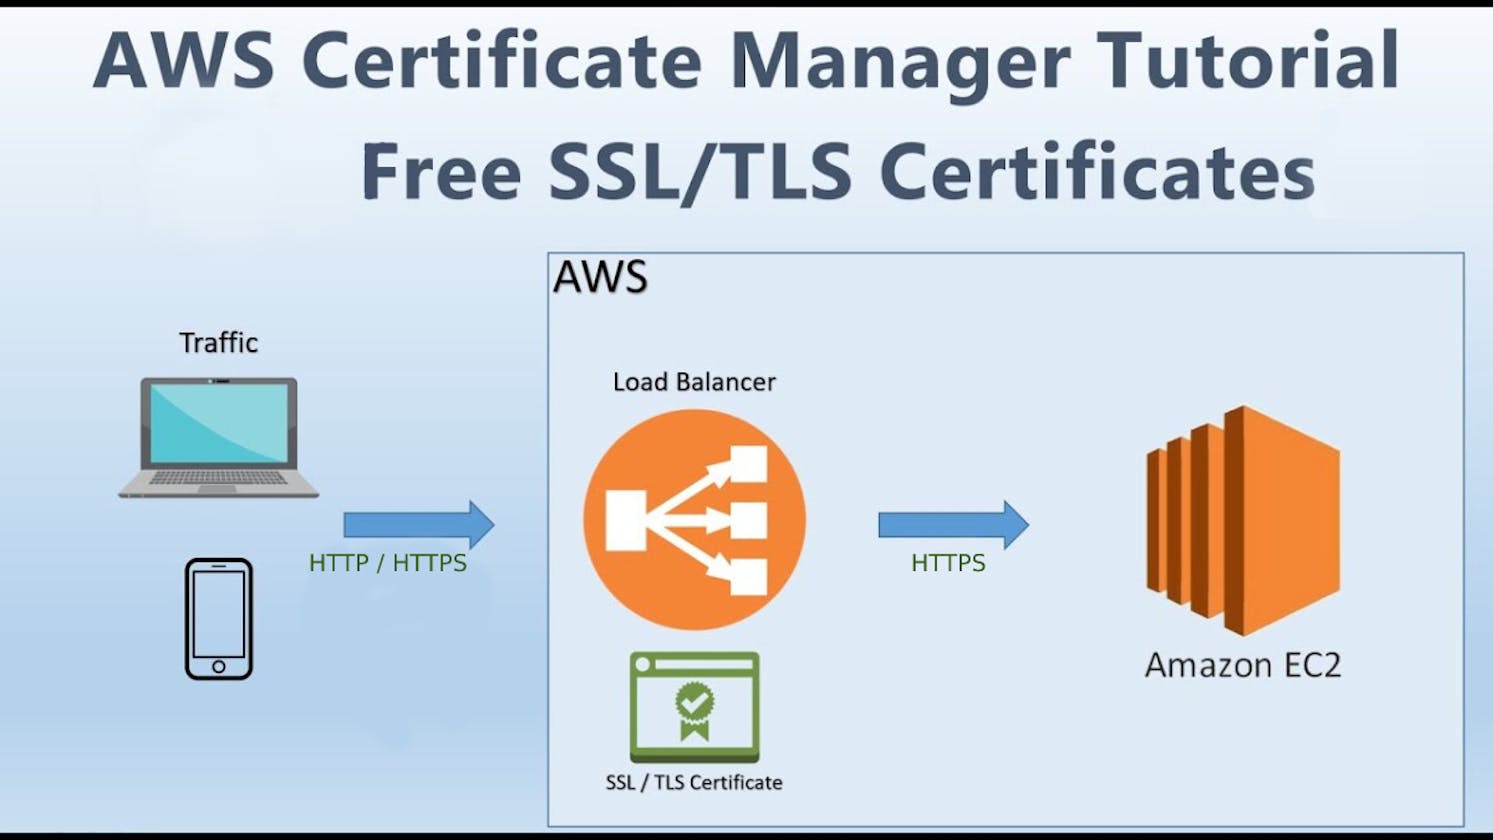 Demonstration of AWS Certificate Manager with Elastic Load Balancer and Route 53.